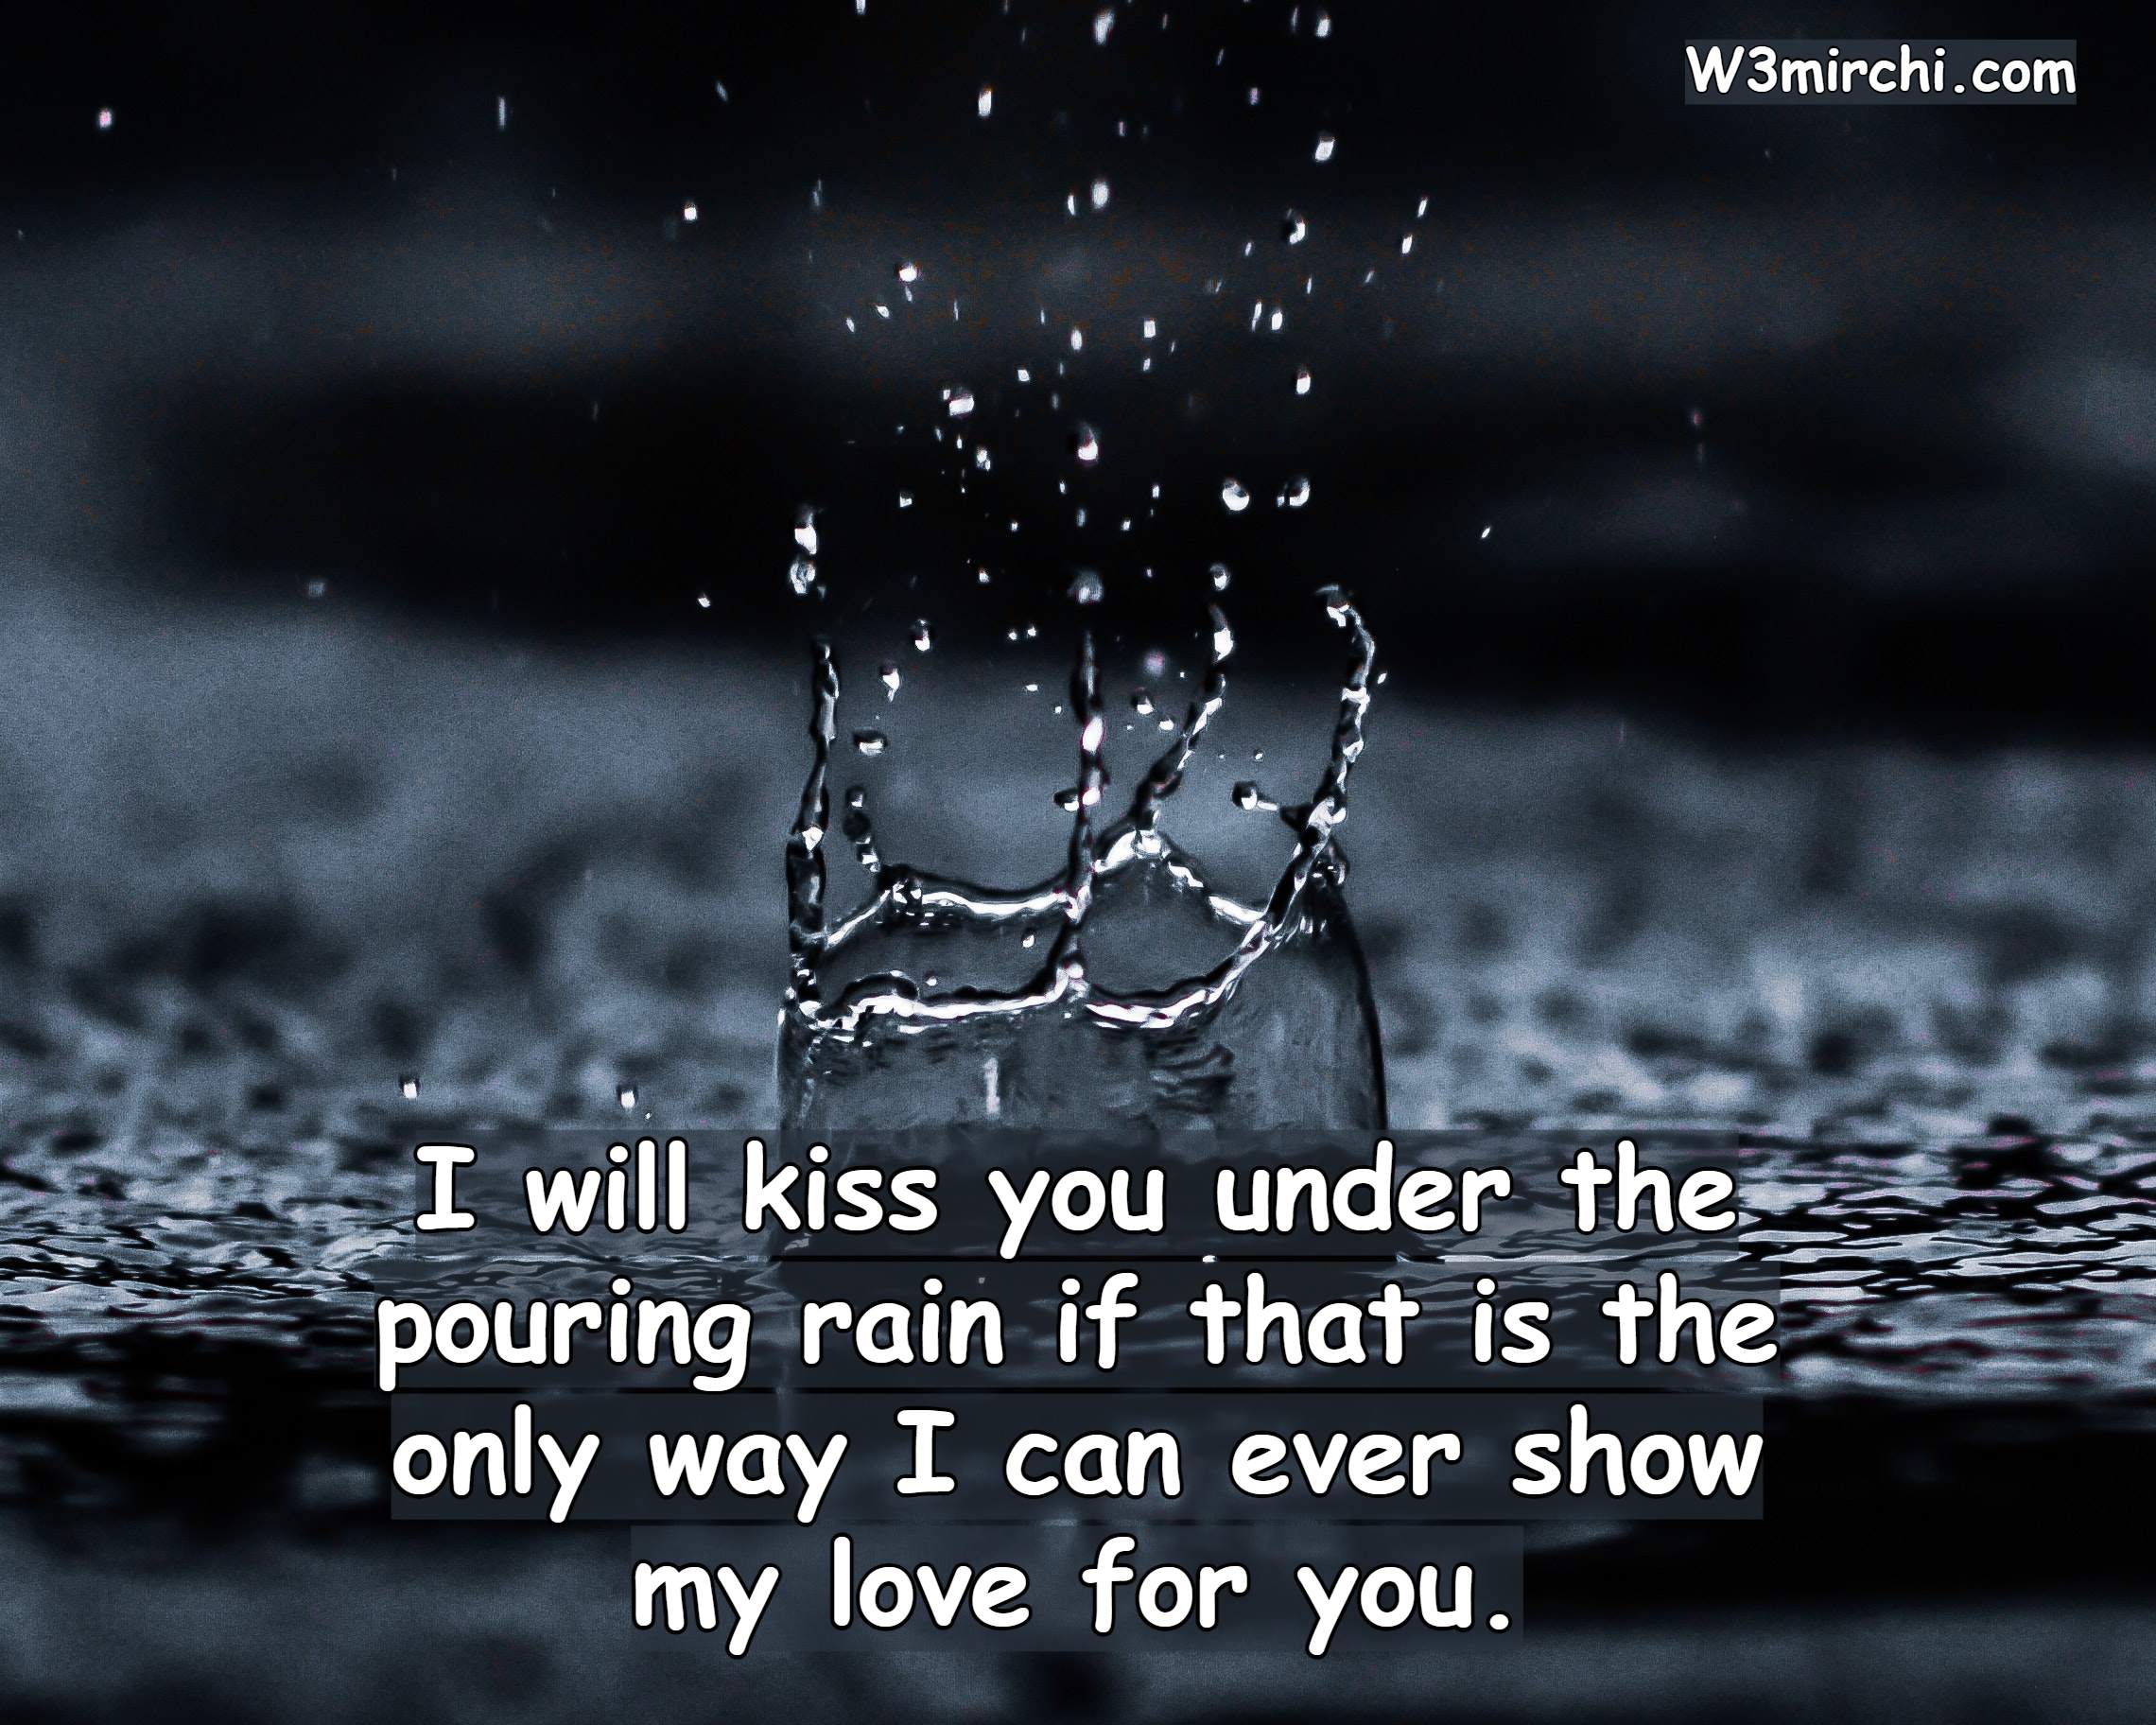 I will kiss you under the pouring rain